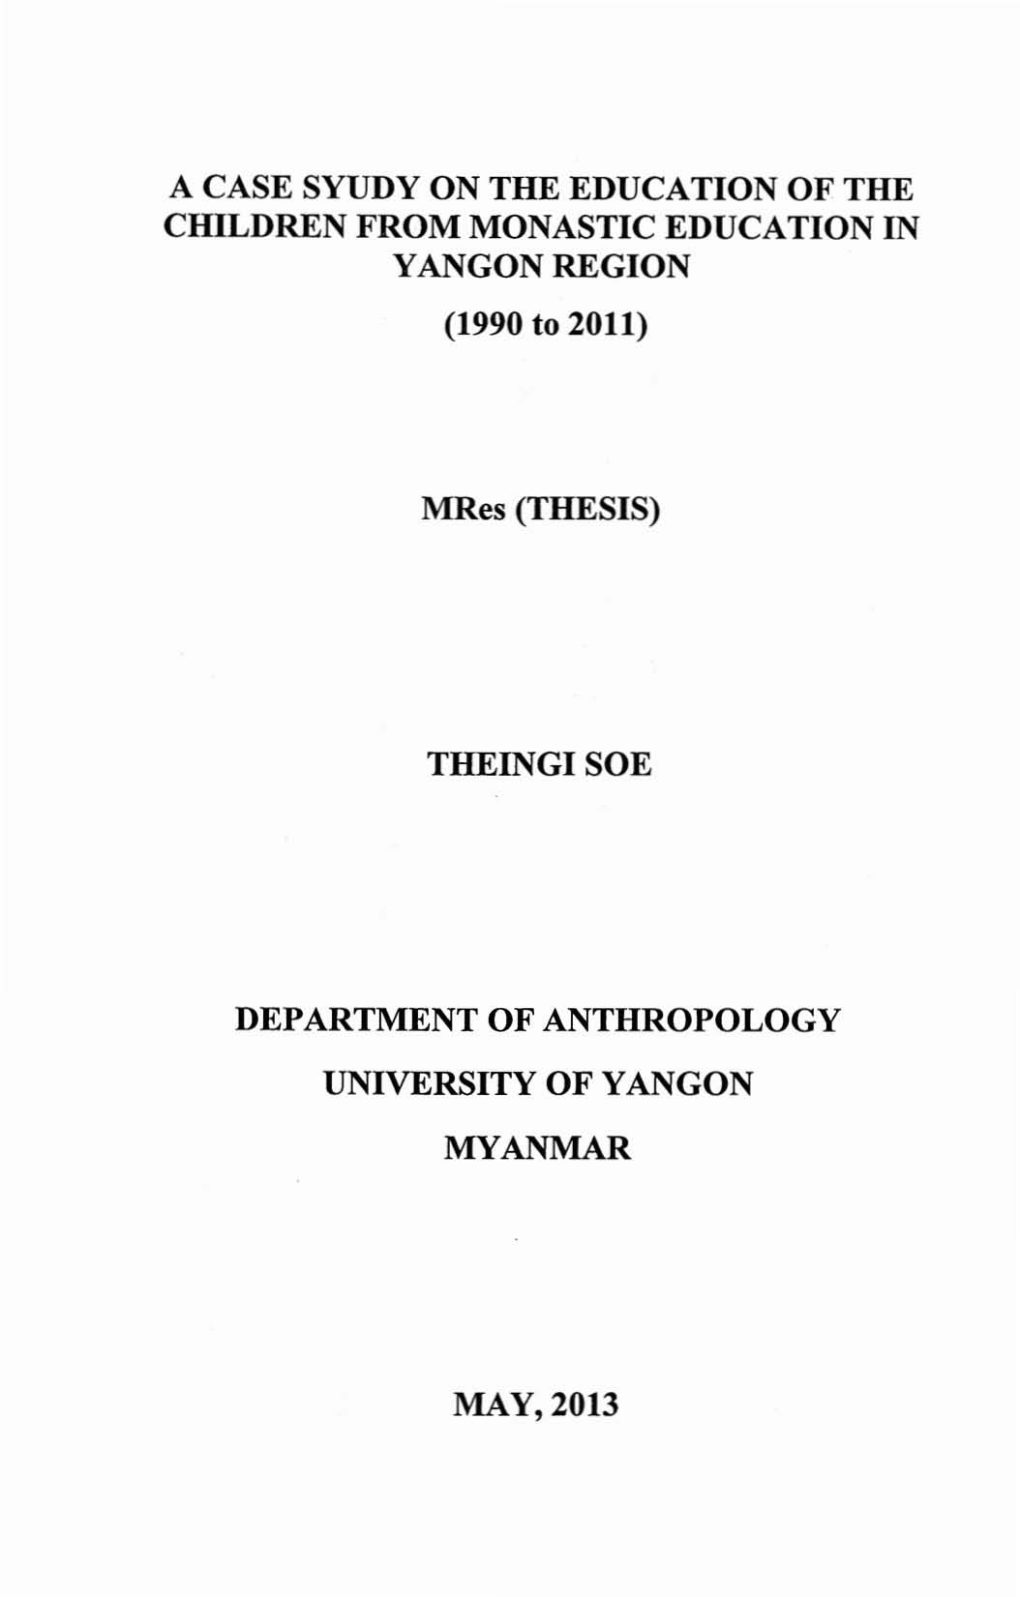 A CASE SYUDY on the EDUCATION of the CHILDREN from MONASTIC EDUCATION in YANGON REGION (1990 to 2011)